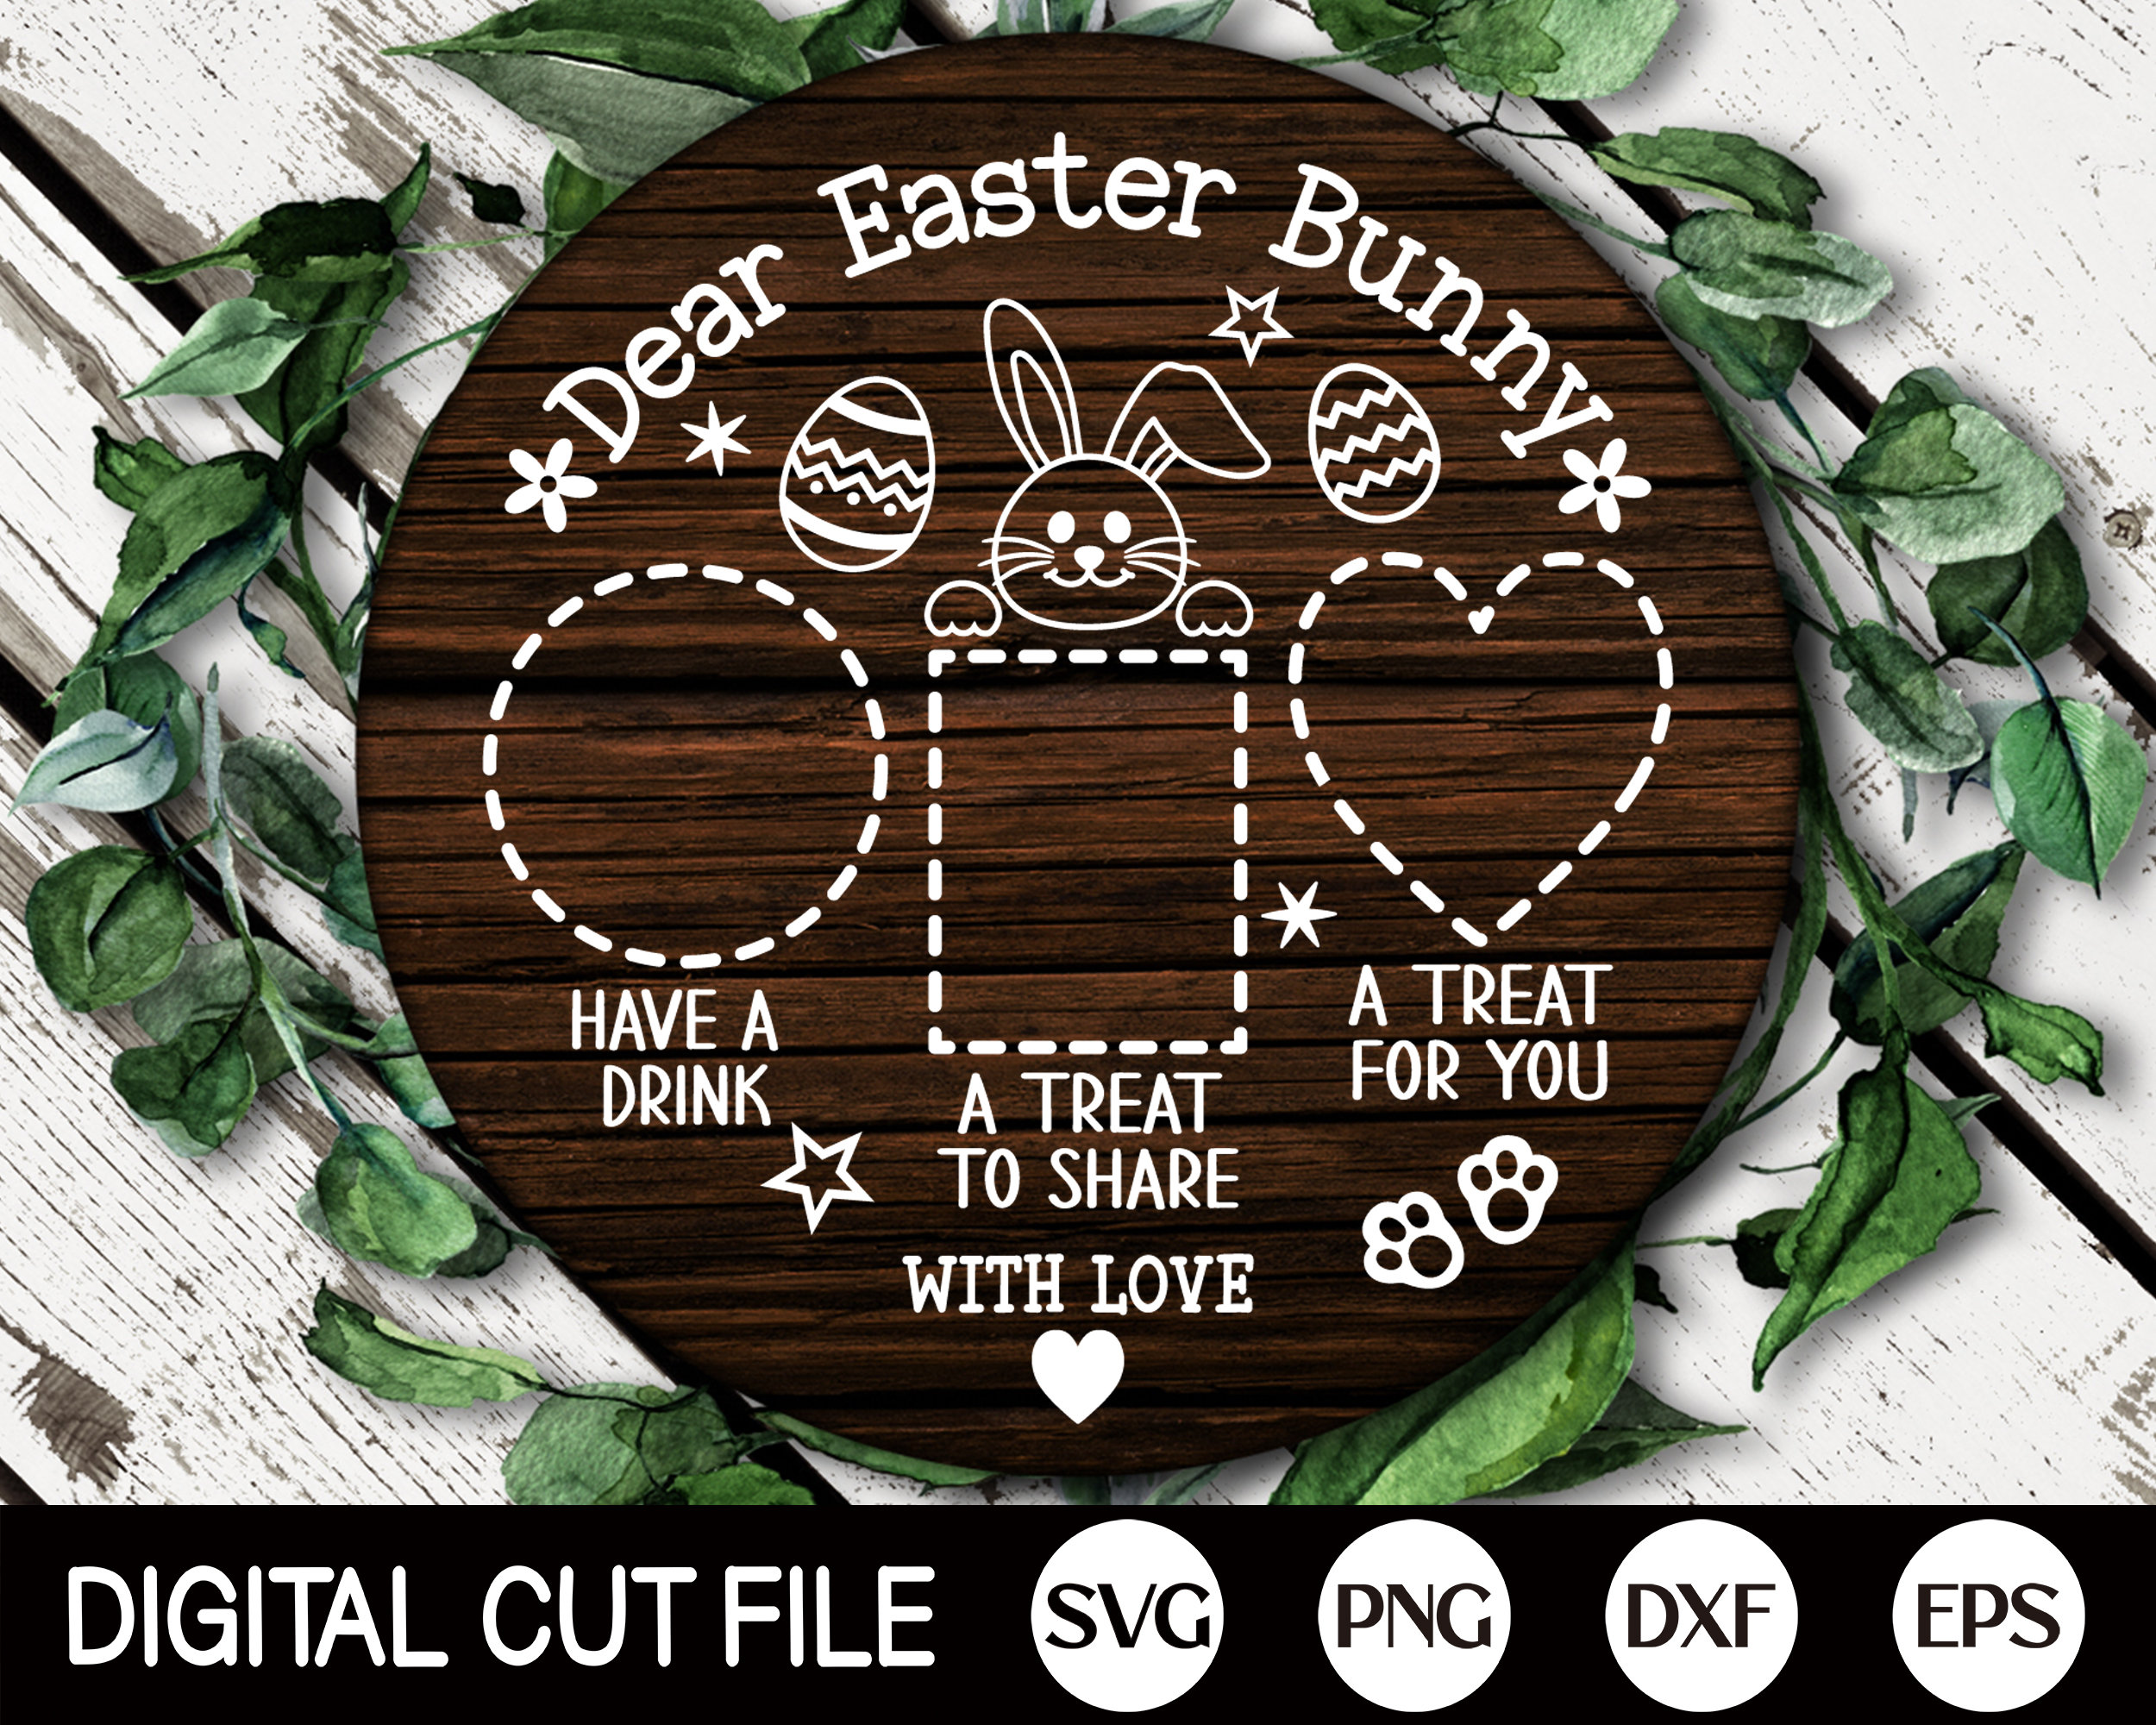 Dear Easter Bunny Tray Svg Easter Svg Dear Easter Cookie - Etsy